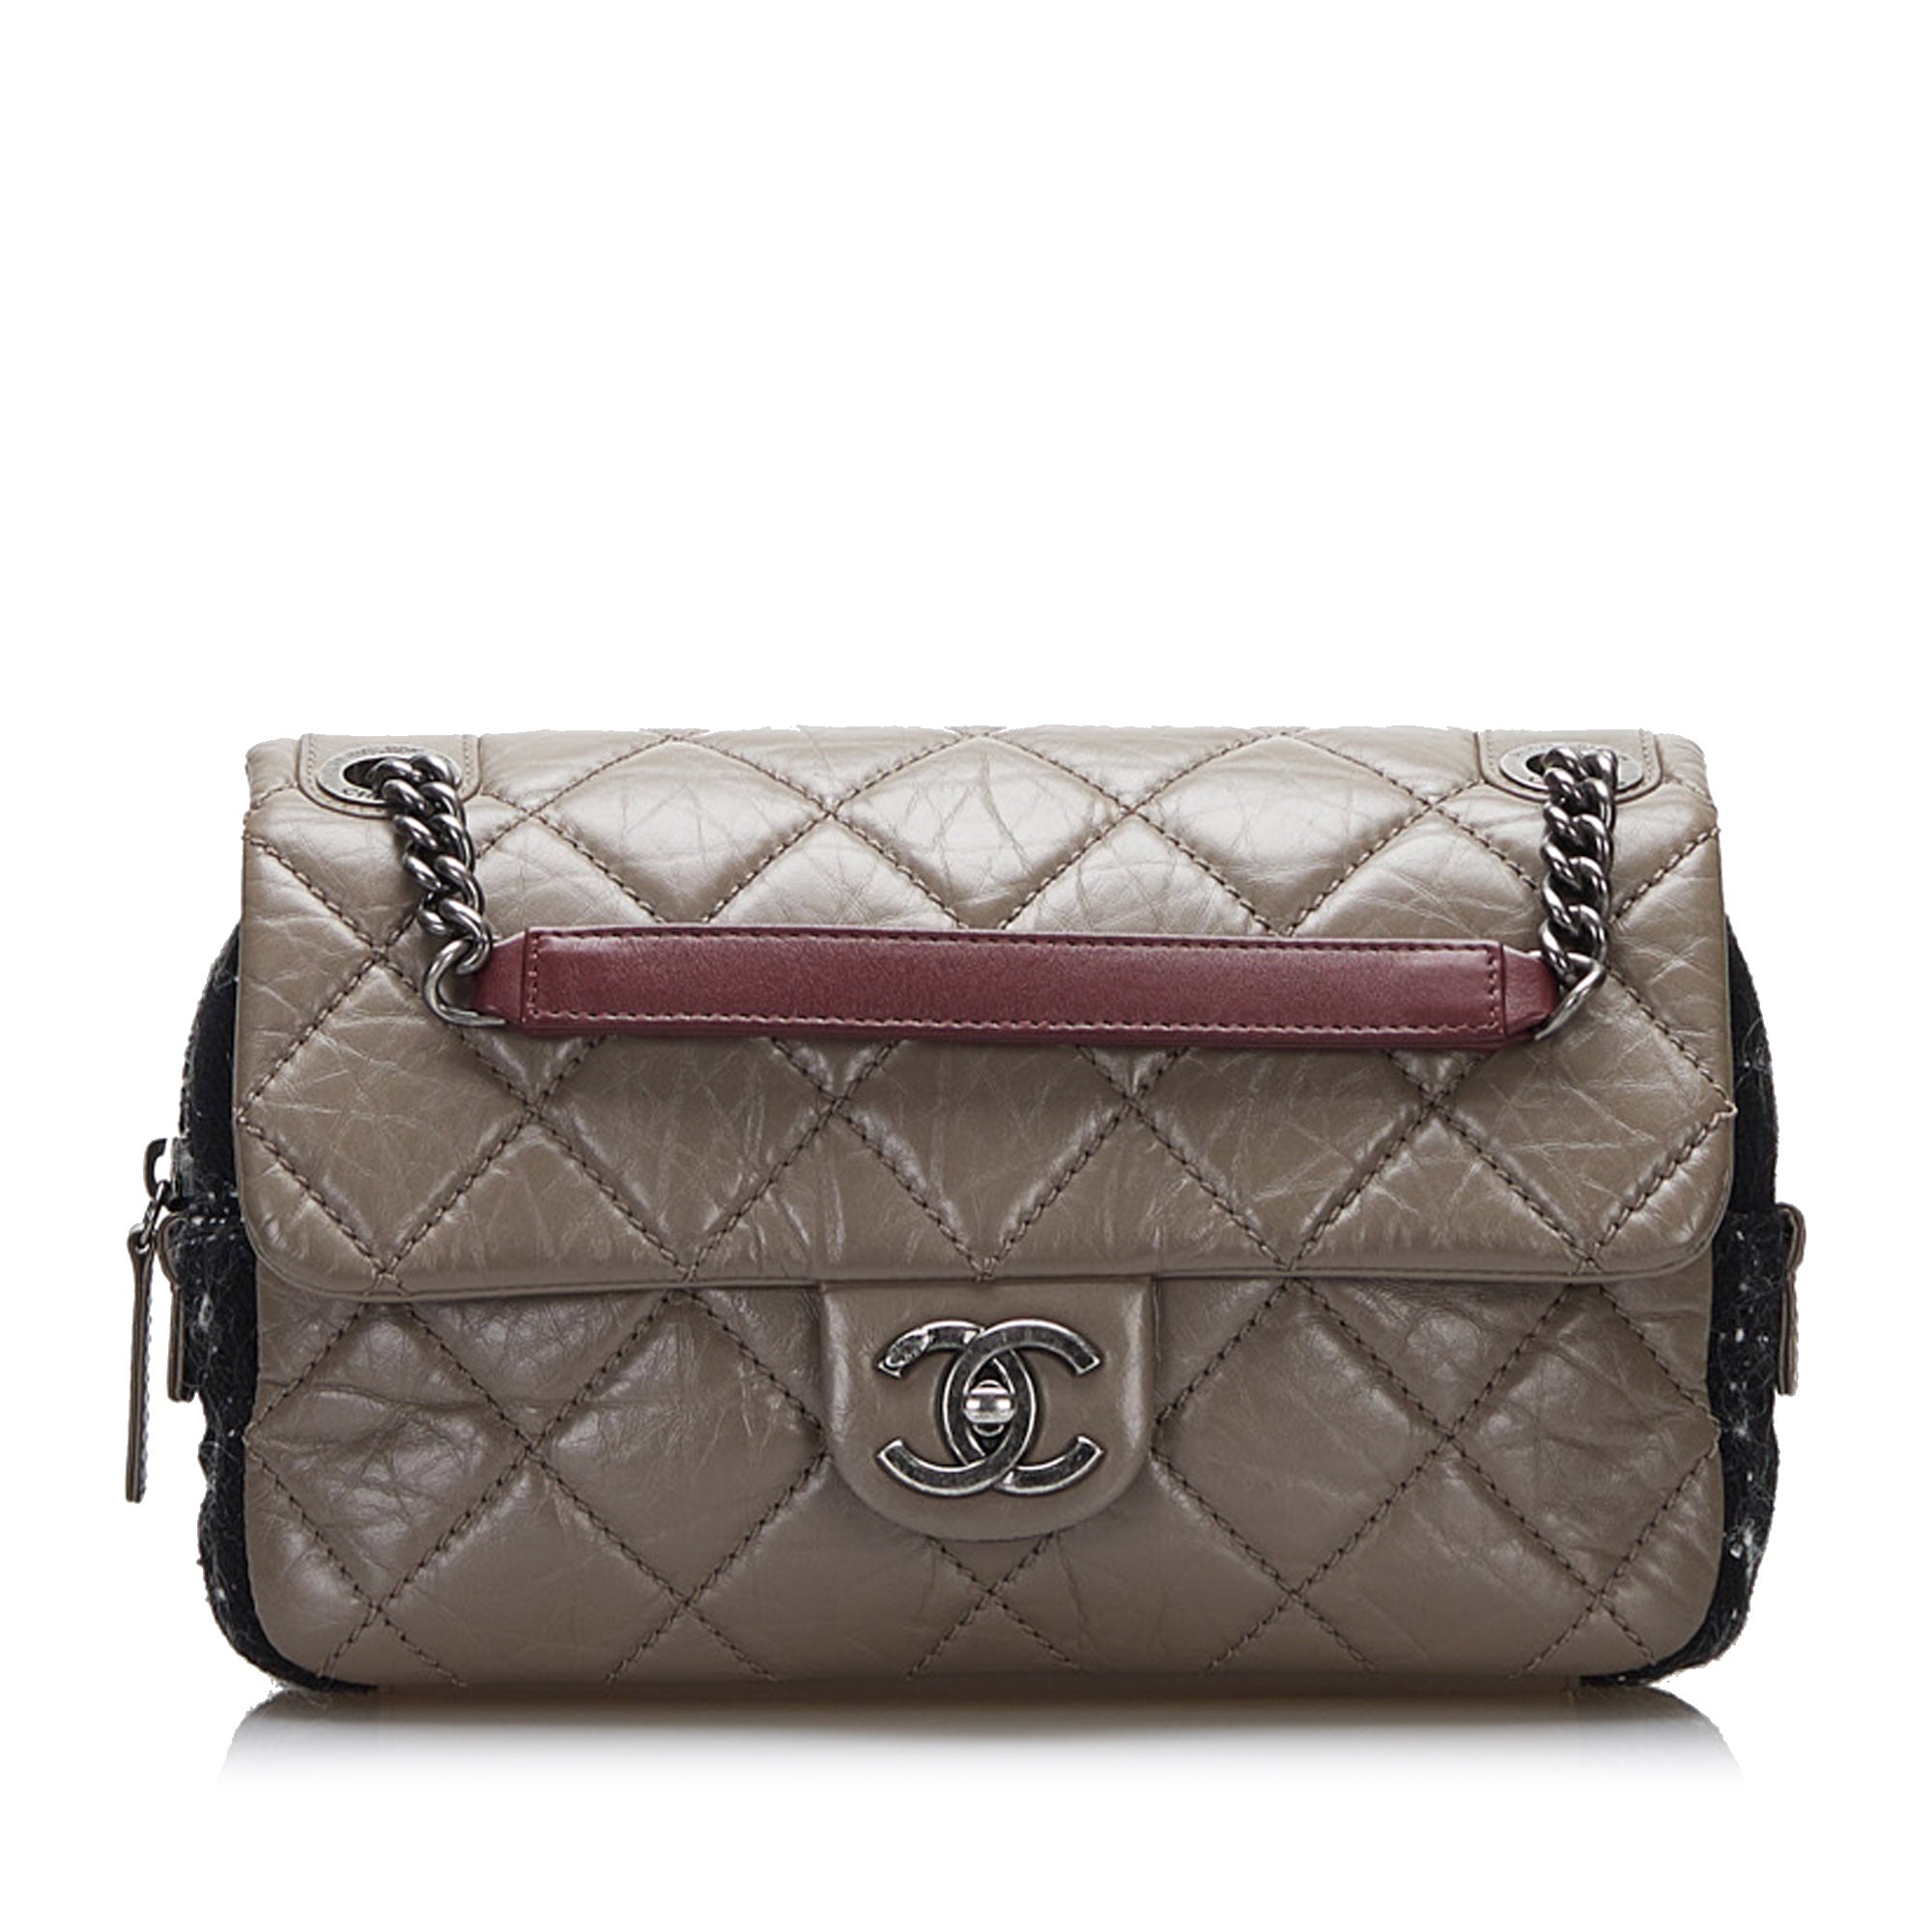 Chanel Medium Classic Double Flap Bag Brown, Green, and White